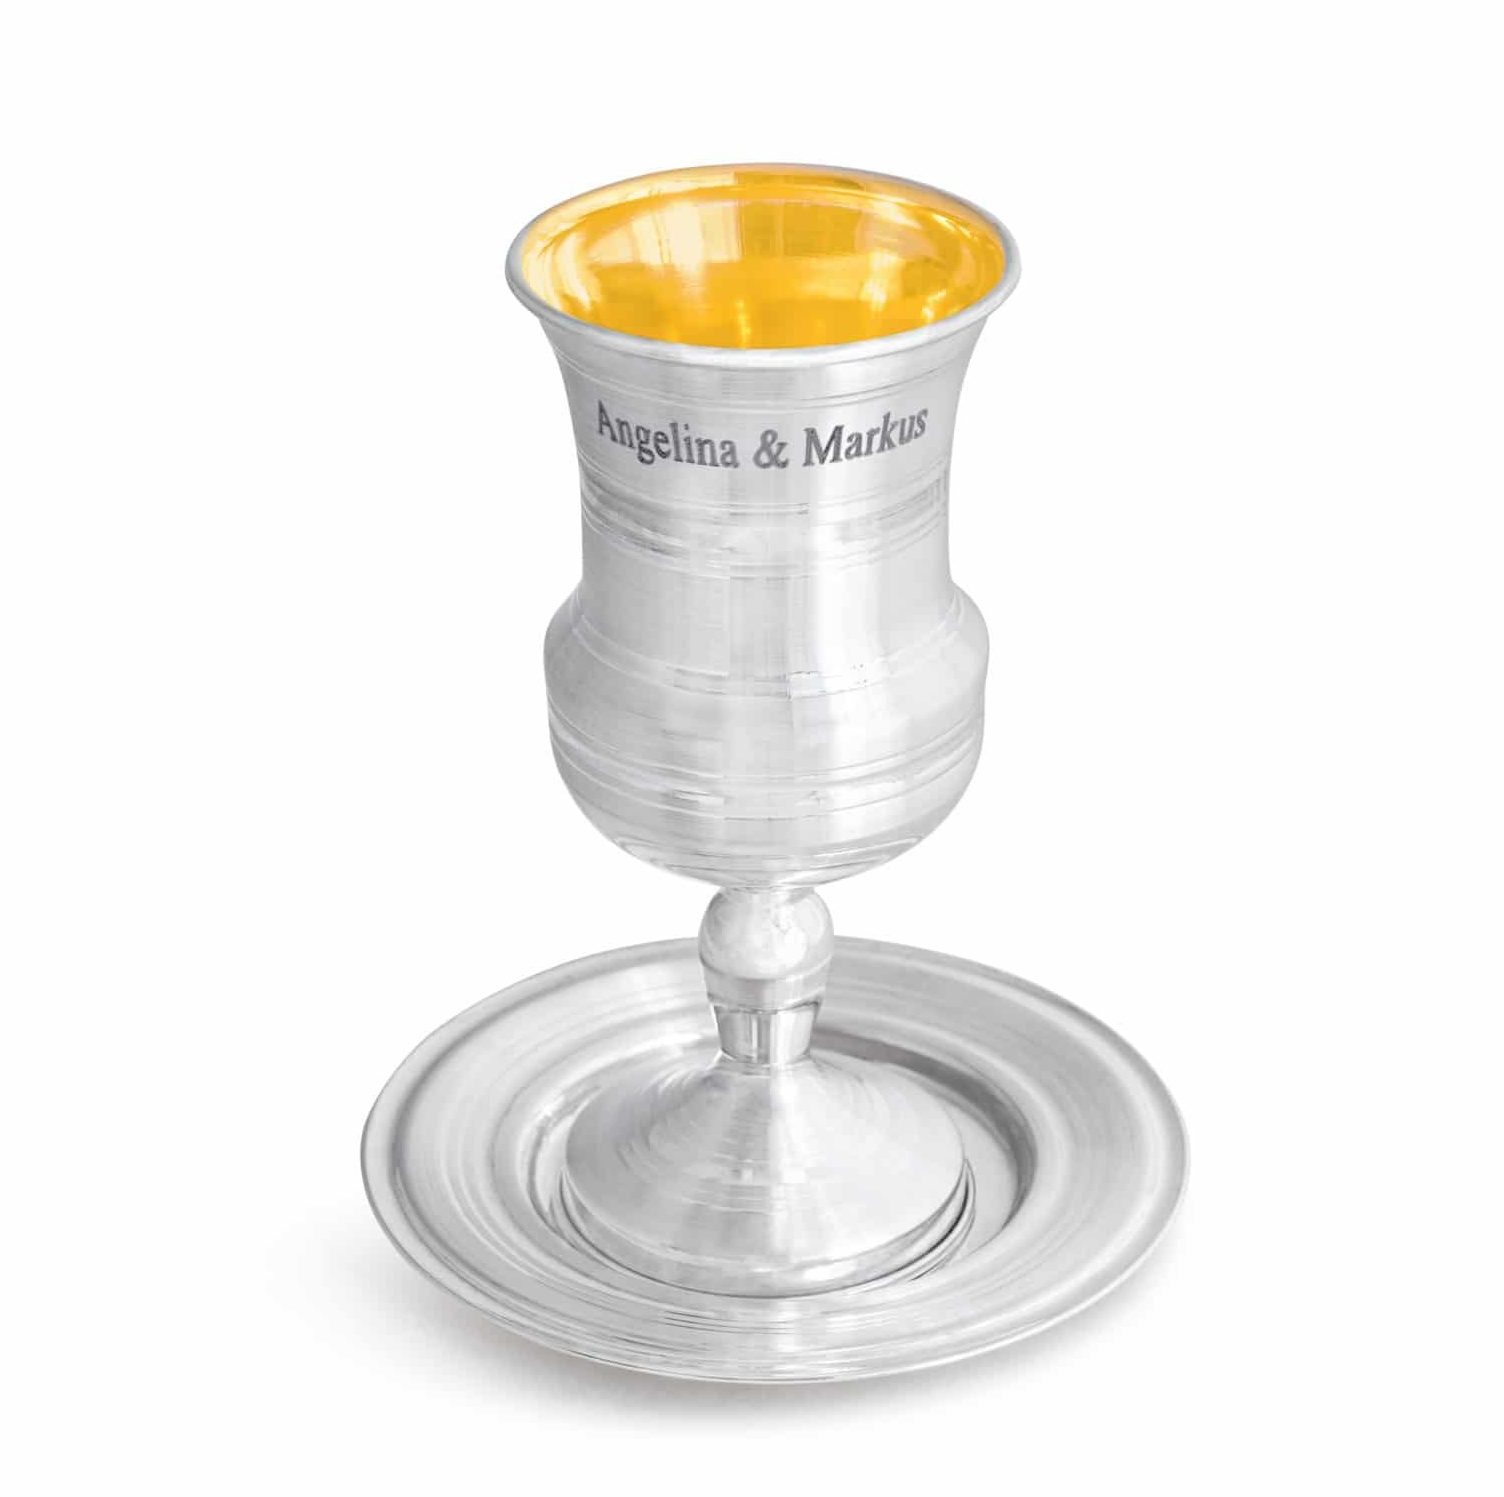 Silver engrave kiddush Cup